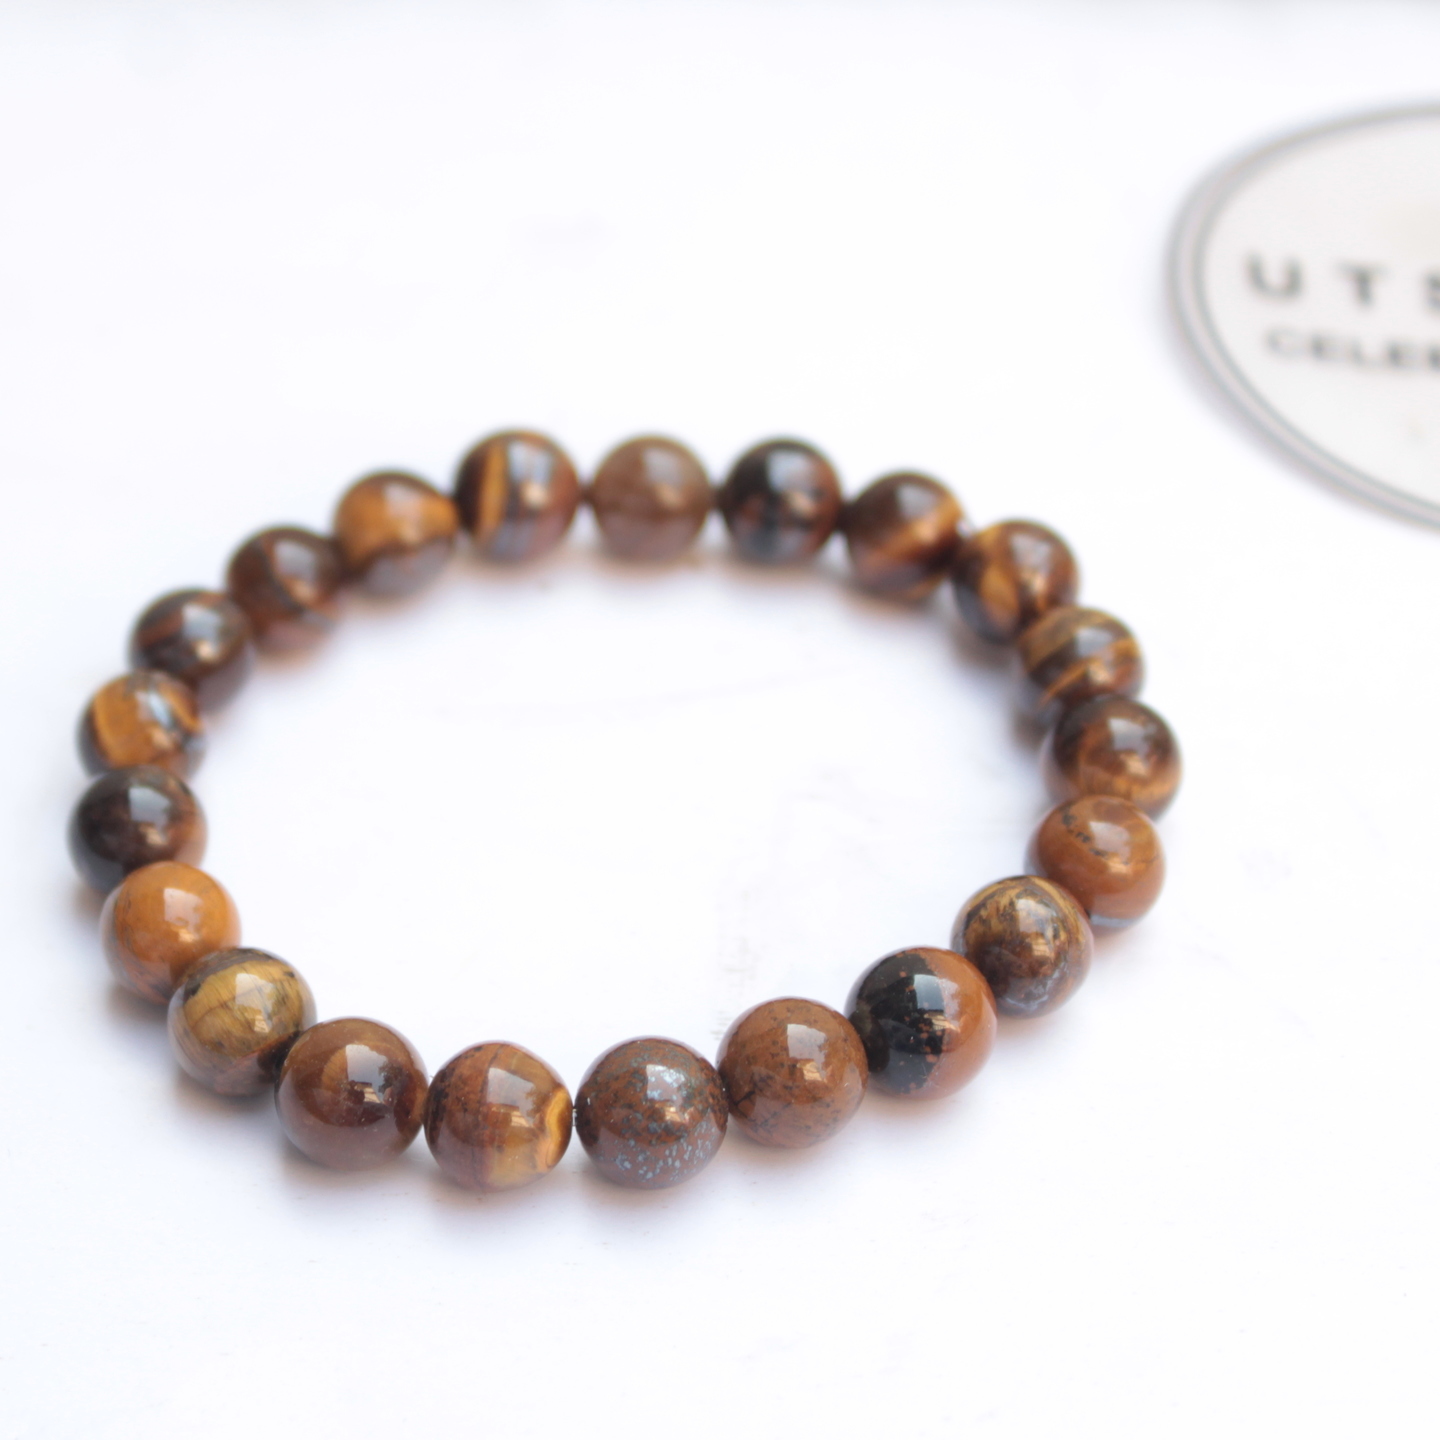 For Luck and Protection - Tigers Eye Bracelet UTSAVAA